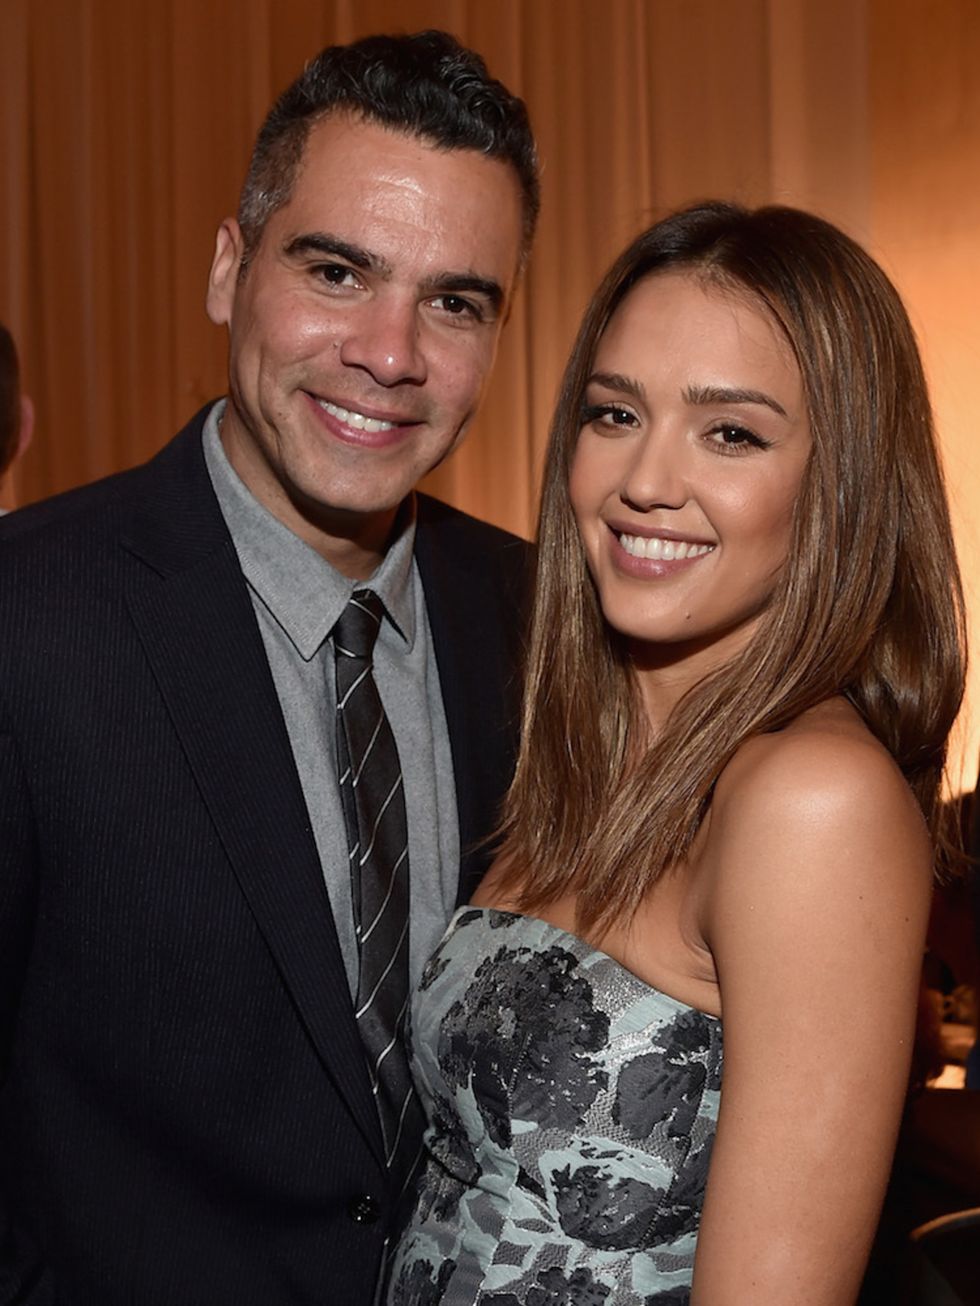 <p><strong>Jessica Alba </strong></p>

<p>Jessica Alba was given a $54,000 Franck Muller gold and diamond watch by Cash Warren, after the birth of their second daughter. A subtle reminder of all the free time she was no longer going to have</p>